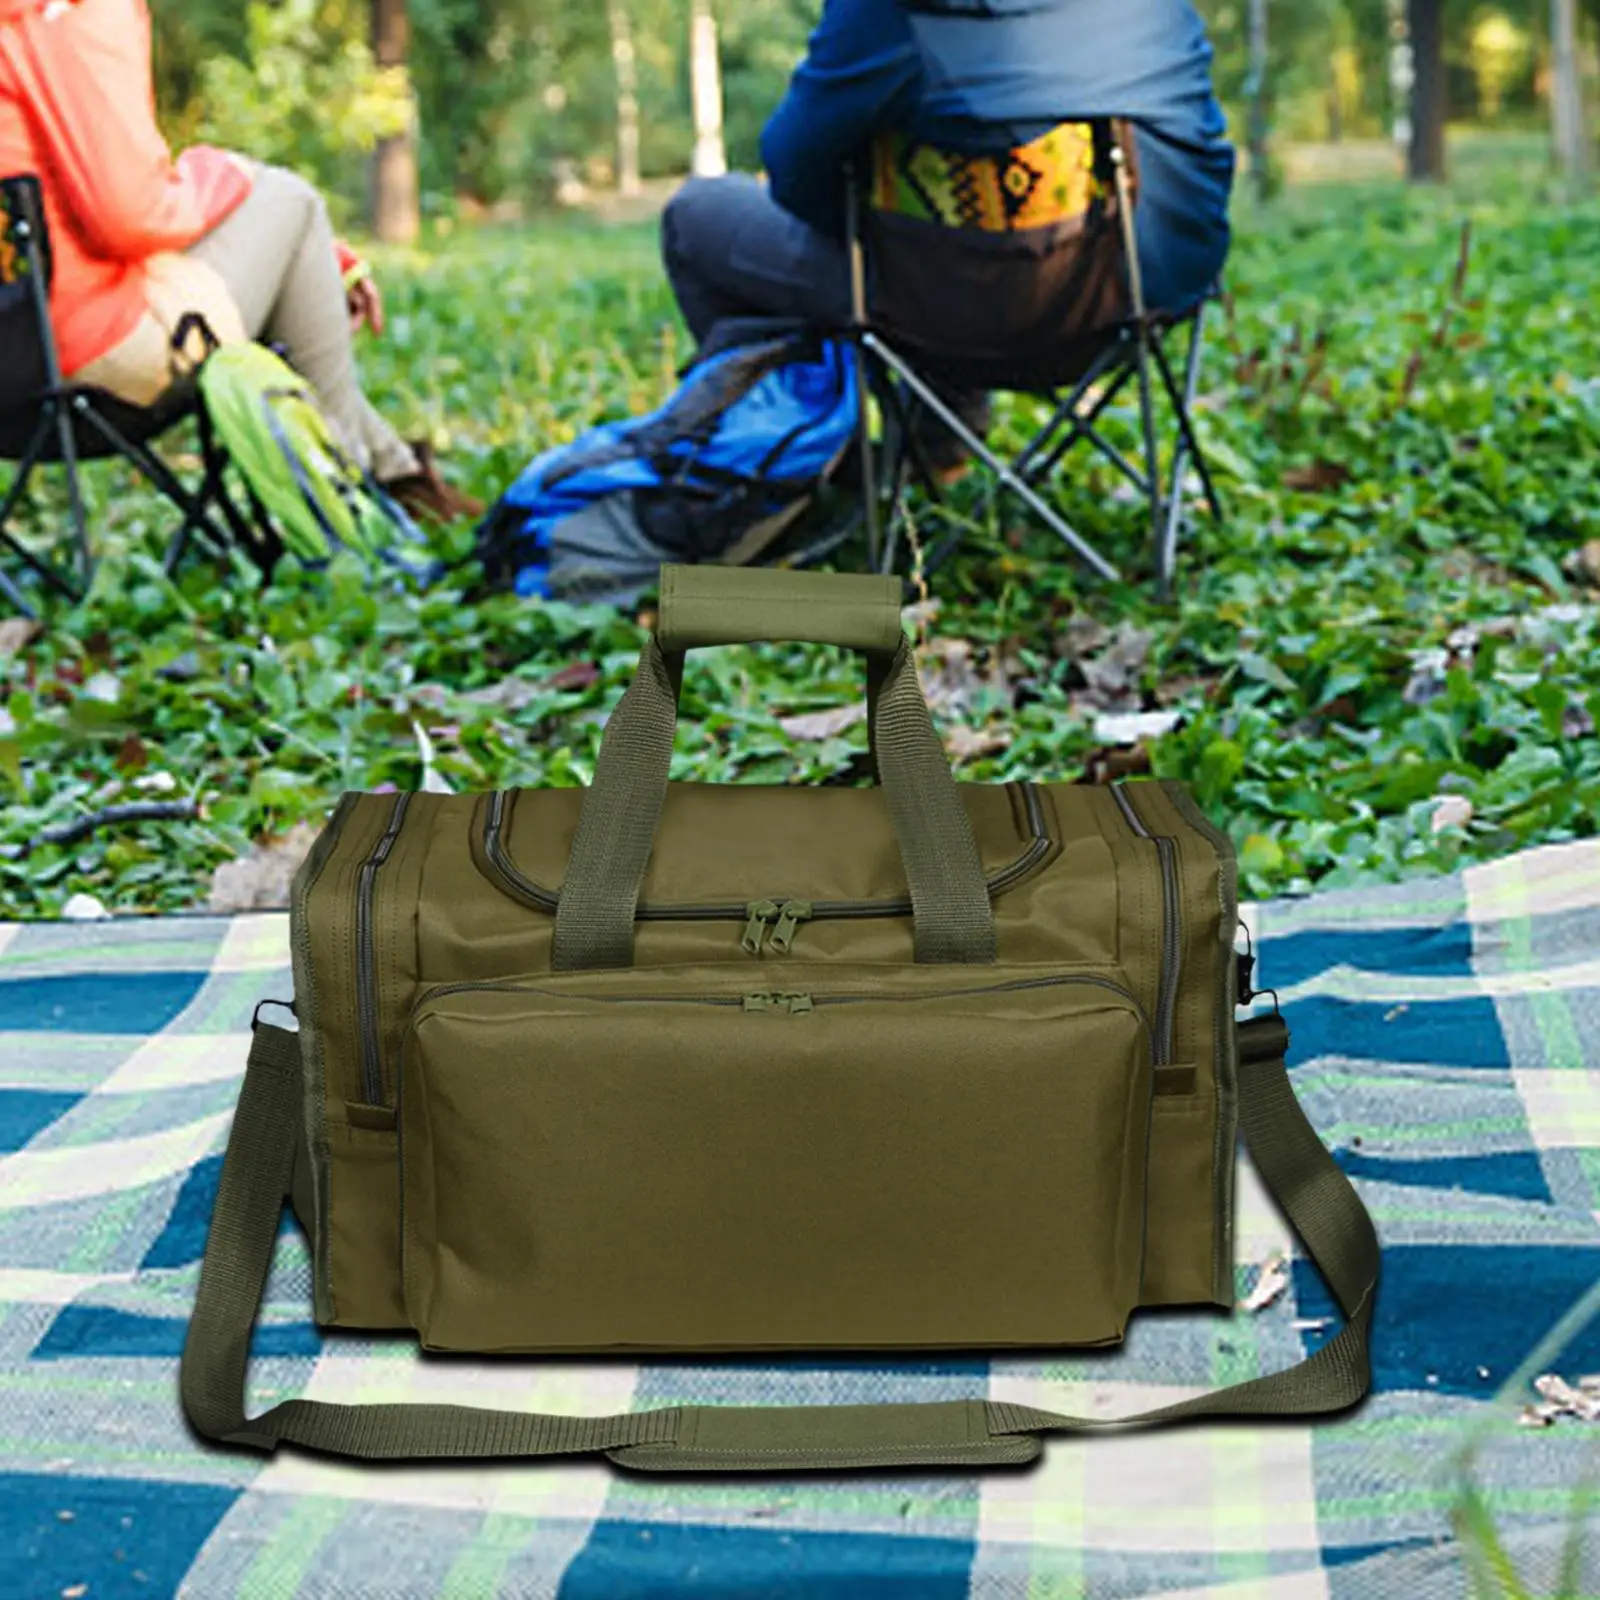 Camping Bag Lunch Box Durable Oxford Cloth Large Capacity Picnic Basket for Fishing Trip Hiking Beach